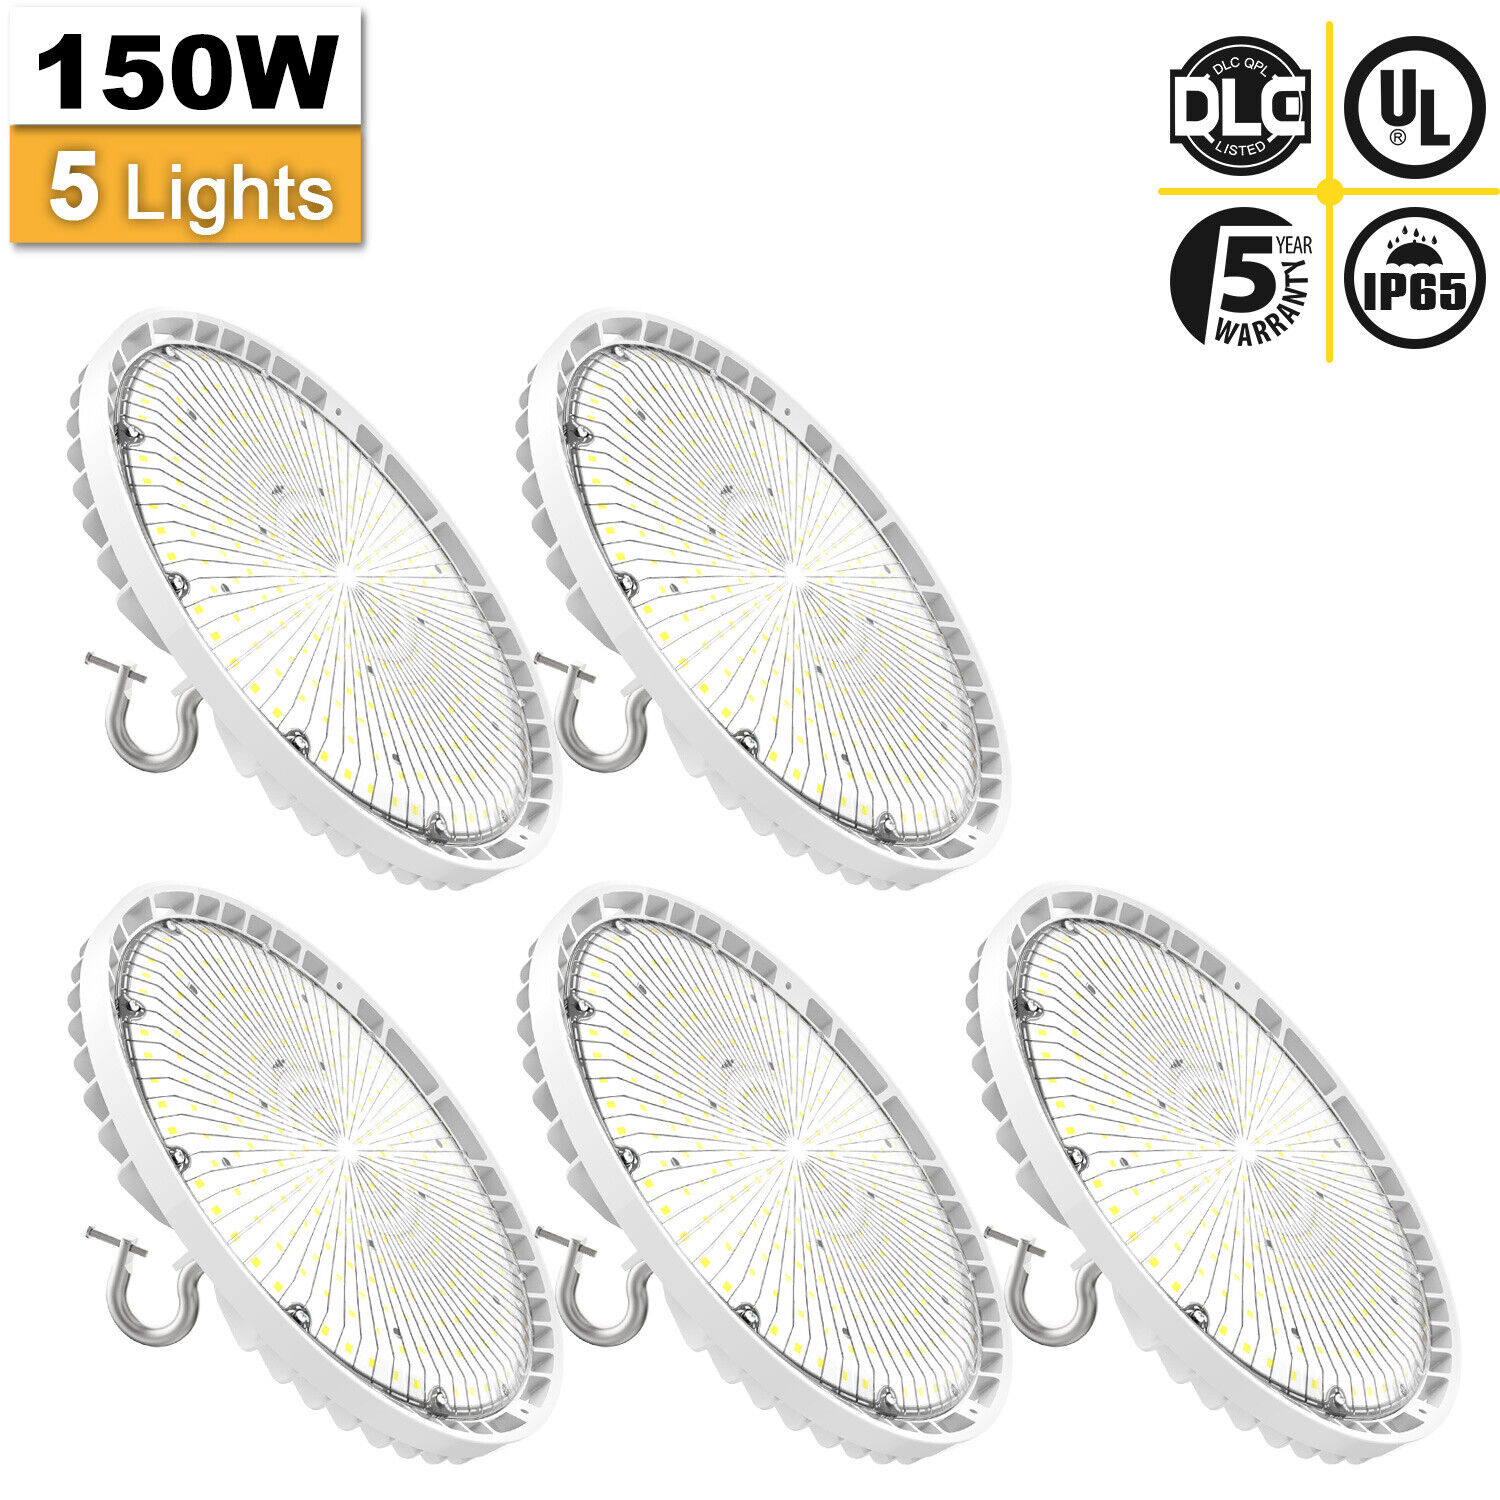 5X 150W High Bay LED Lights 21000lm 5000K Commercial Warehouse Lighting Fixture